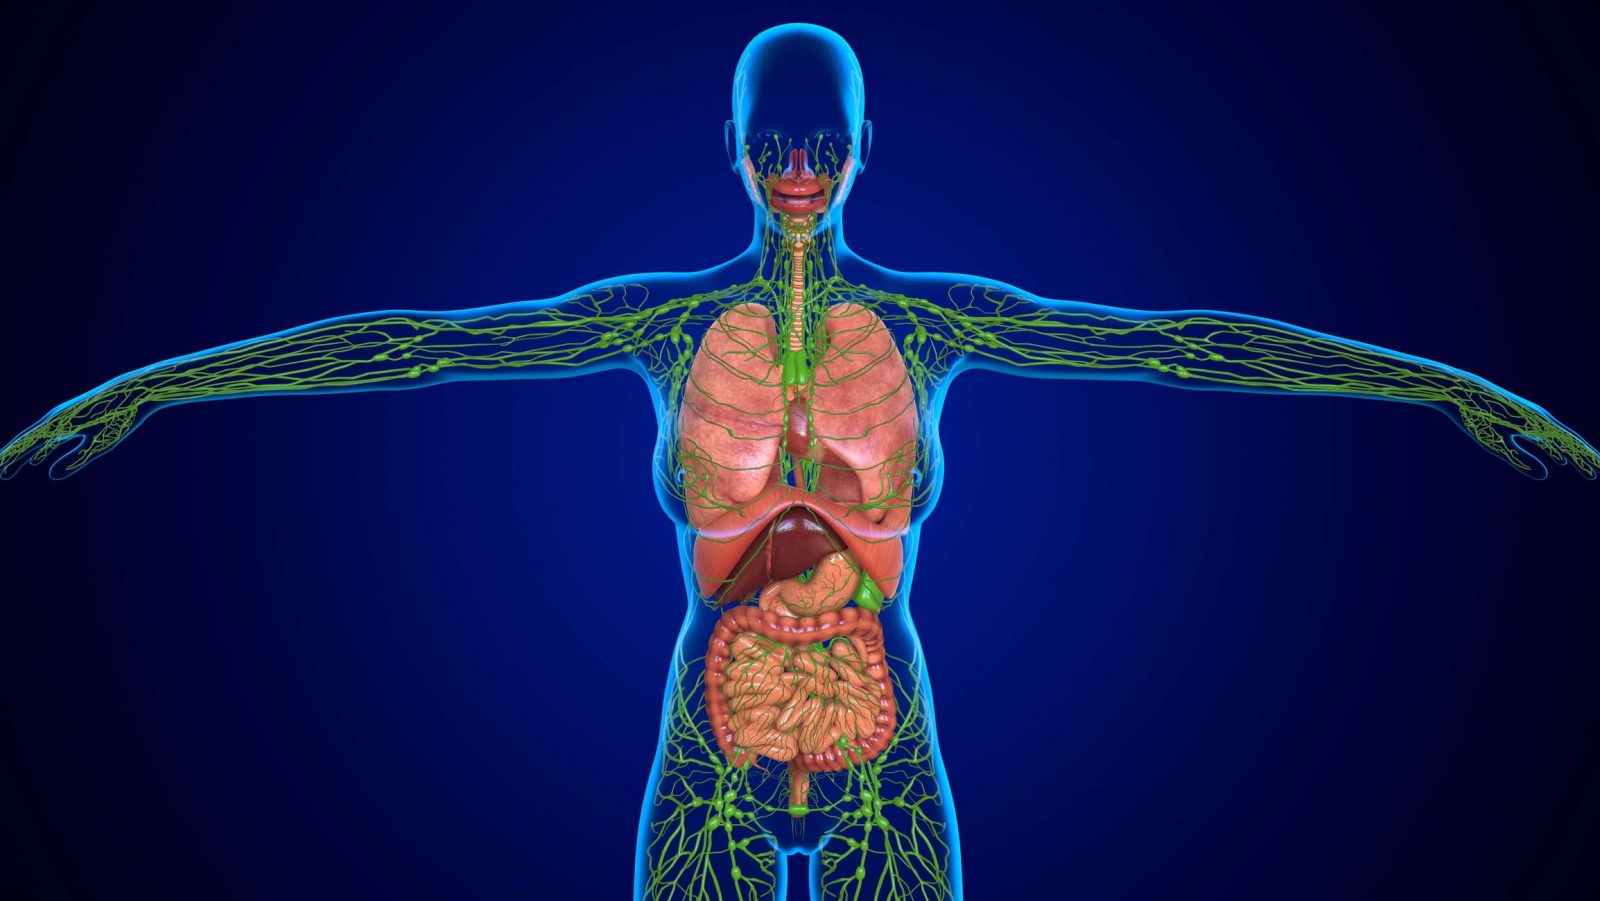 If You Can Get 15/20 on This Quiz on Your First Try, You Definitely Know a Lot About the Human Body Lymphatic system